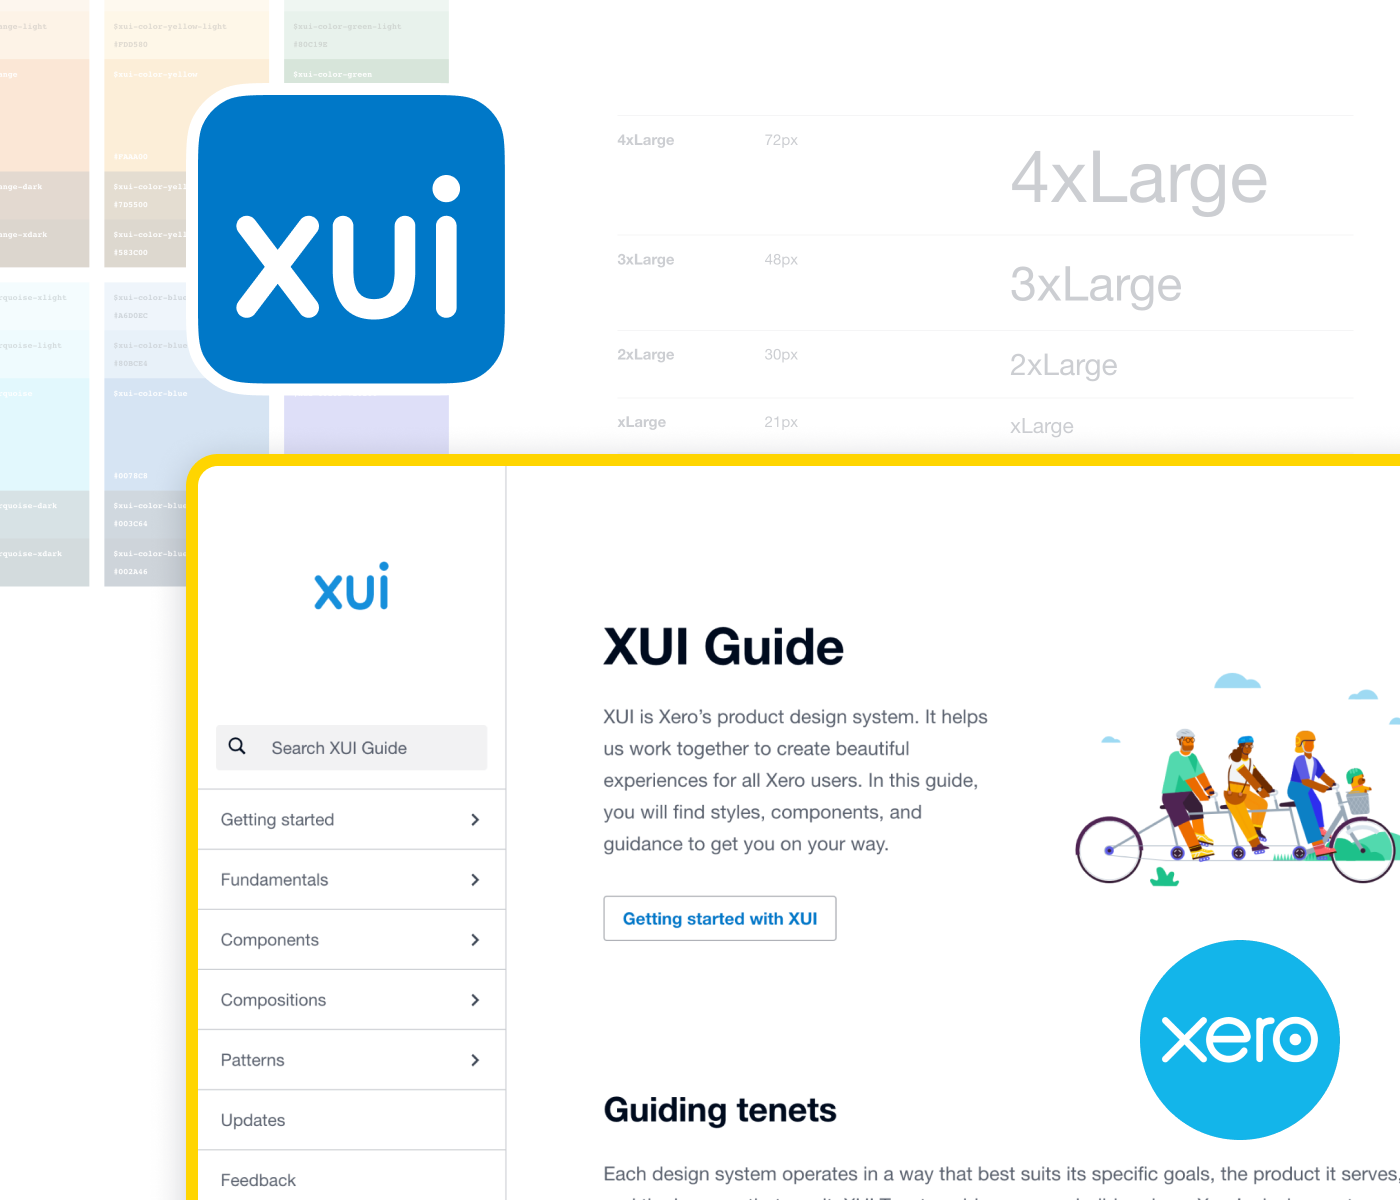 An image of the Xero design system documentation as well as both the XUI and Xero logos